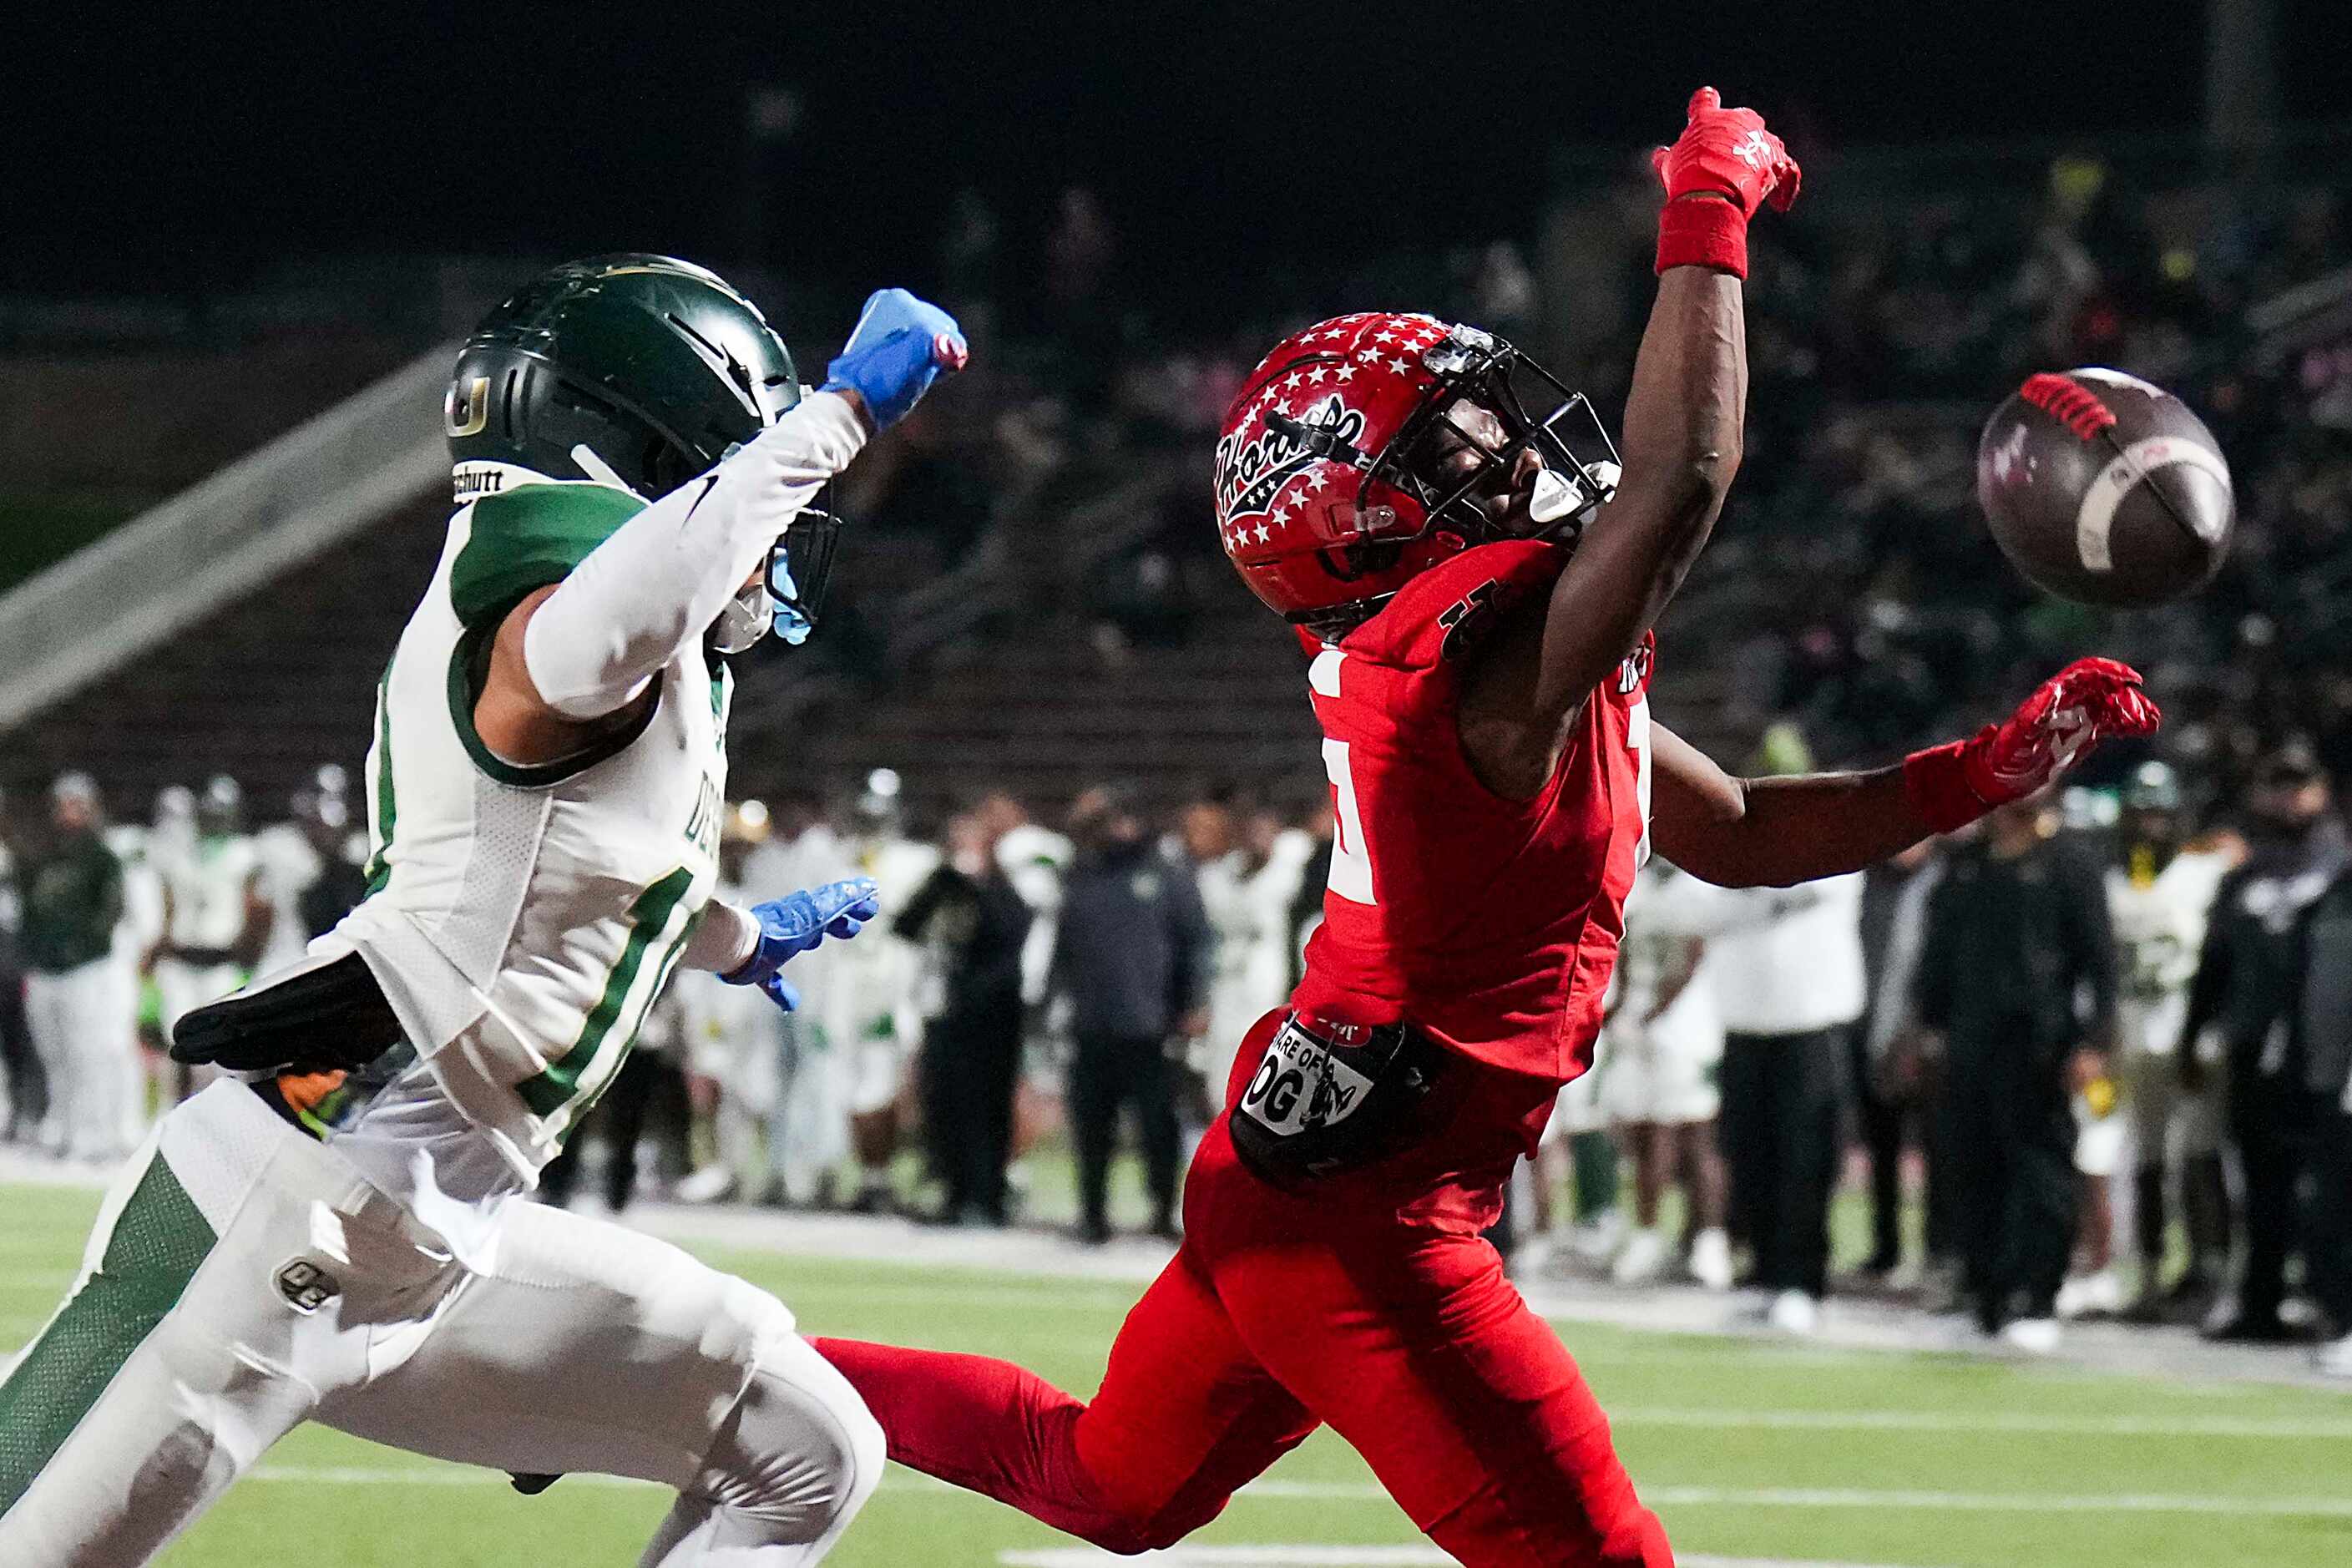 A pass goes out of reach for Cedar Hill wide receiver Kymeion Turner (15) as DeSoto...